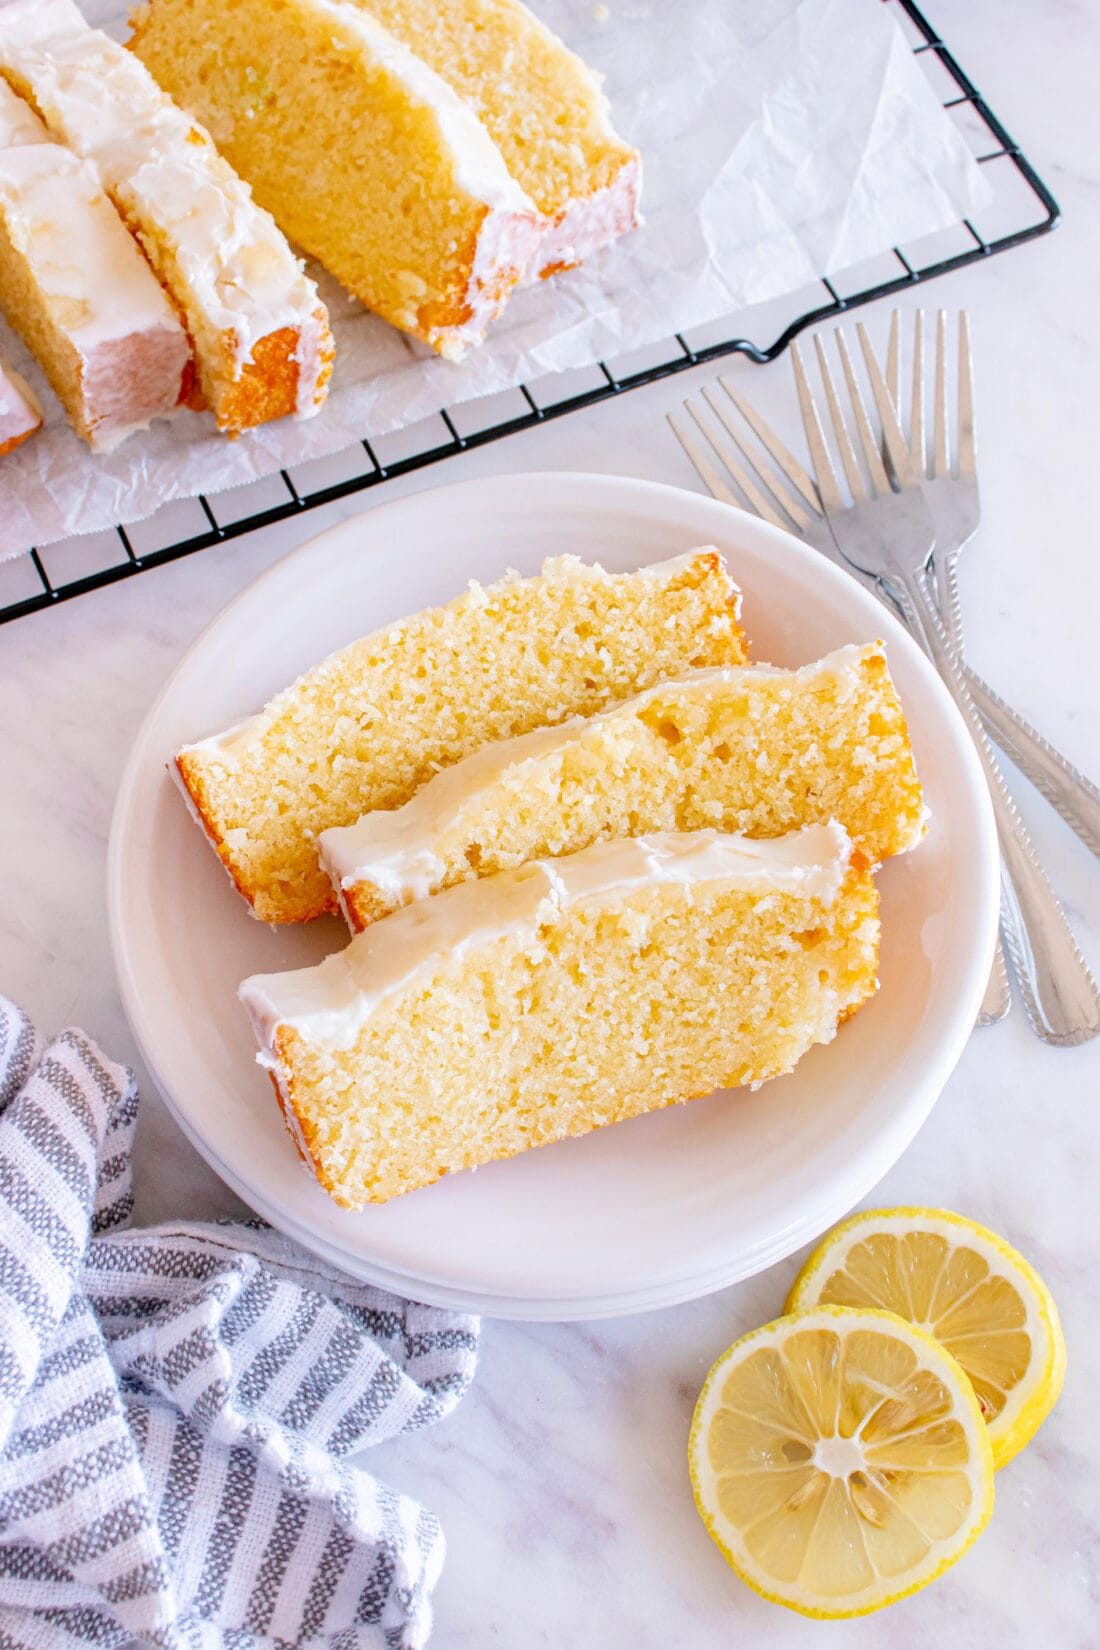 Three slices of Lemon Pound Cake on a plate with more slices in the background